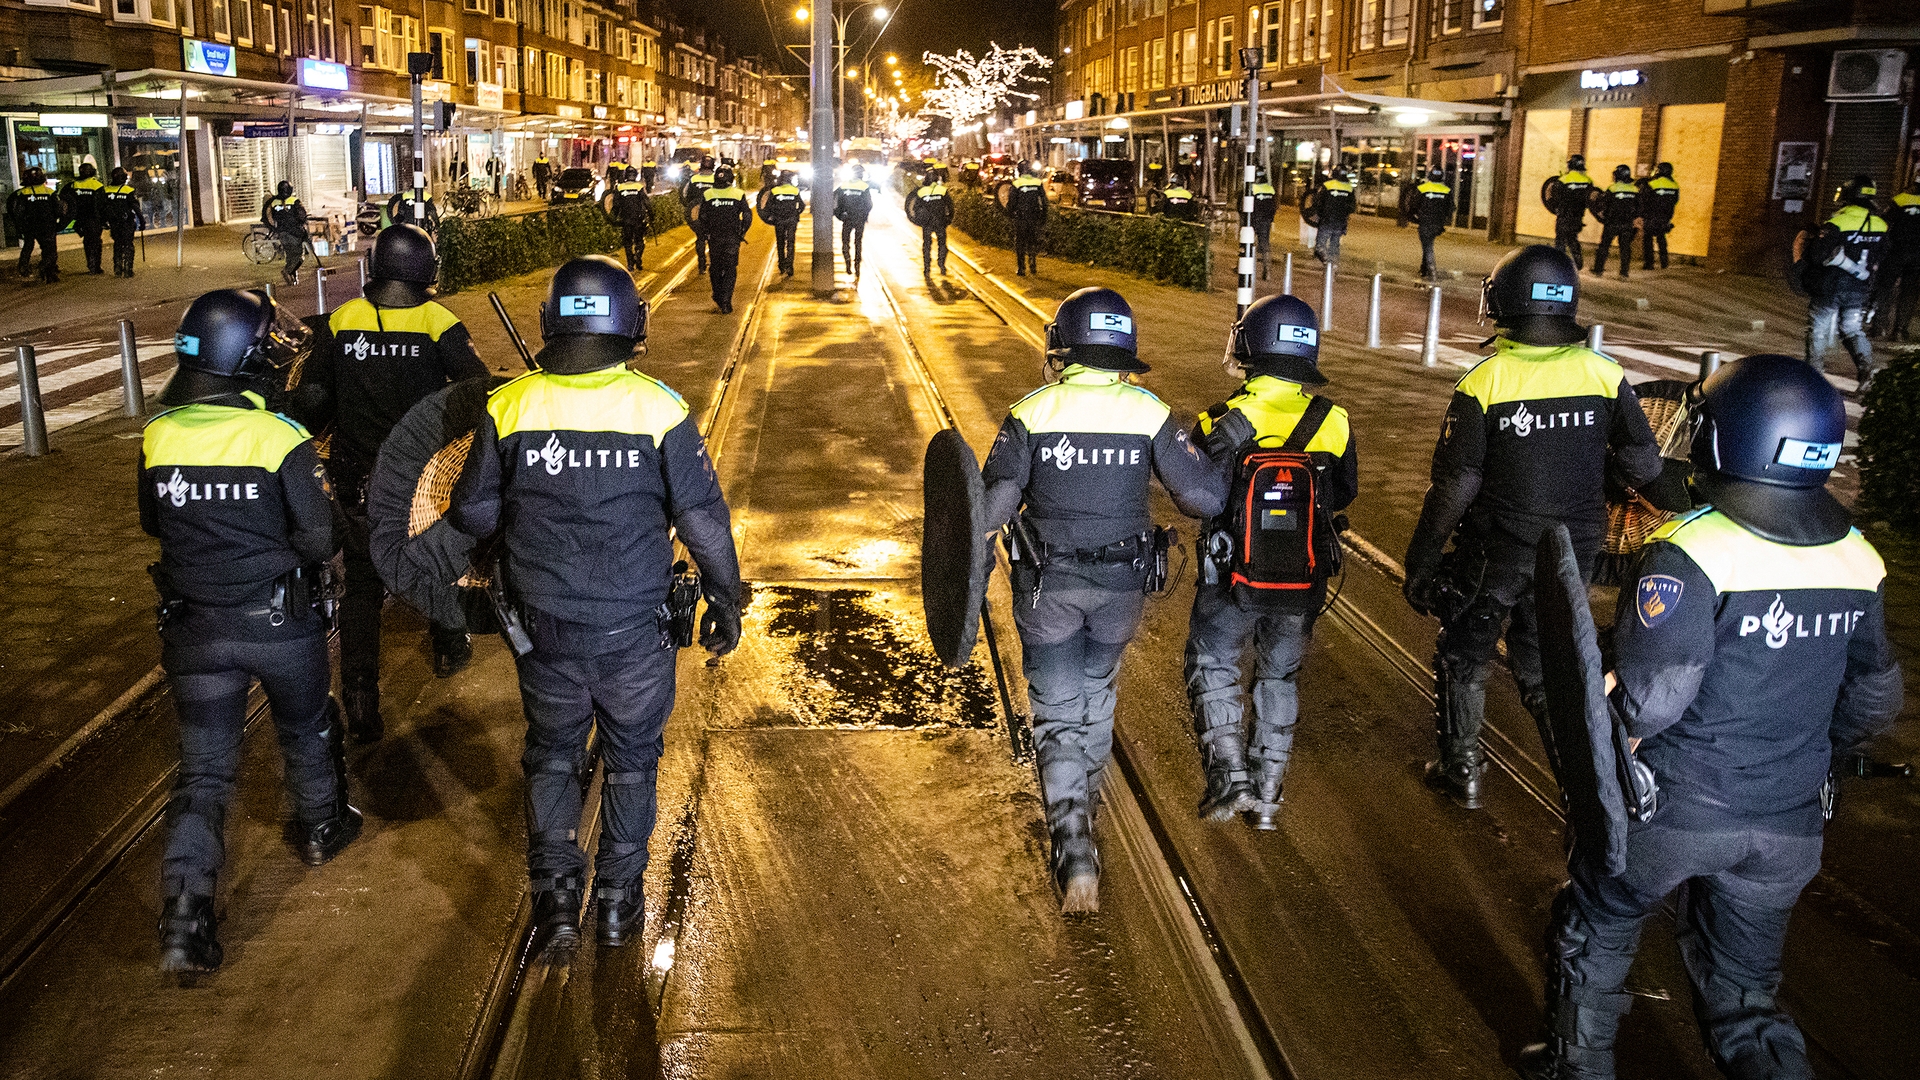 Police arrest 17 people in Rotterdam for gathering